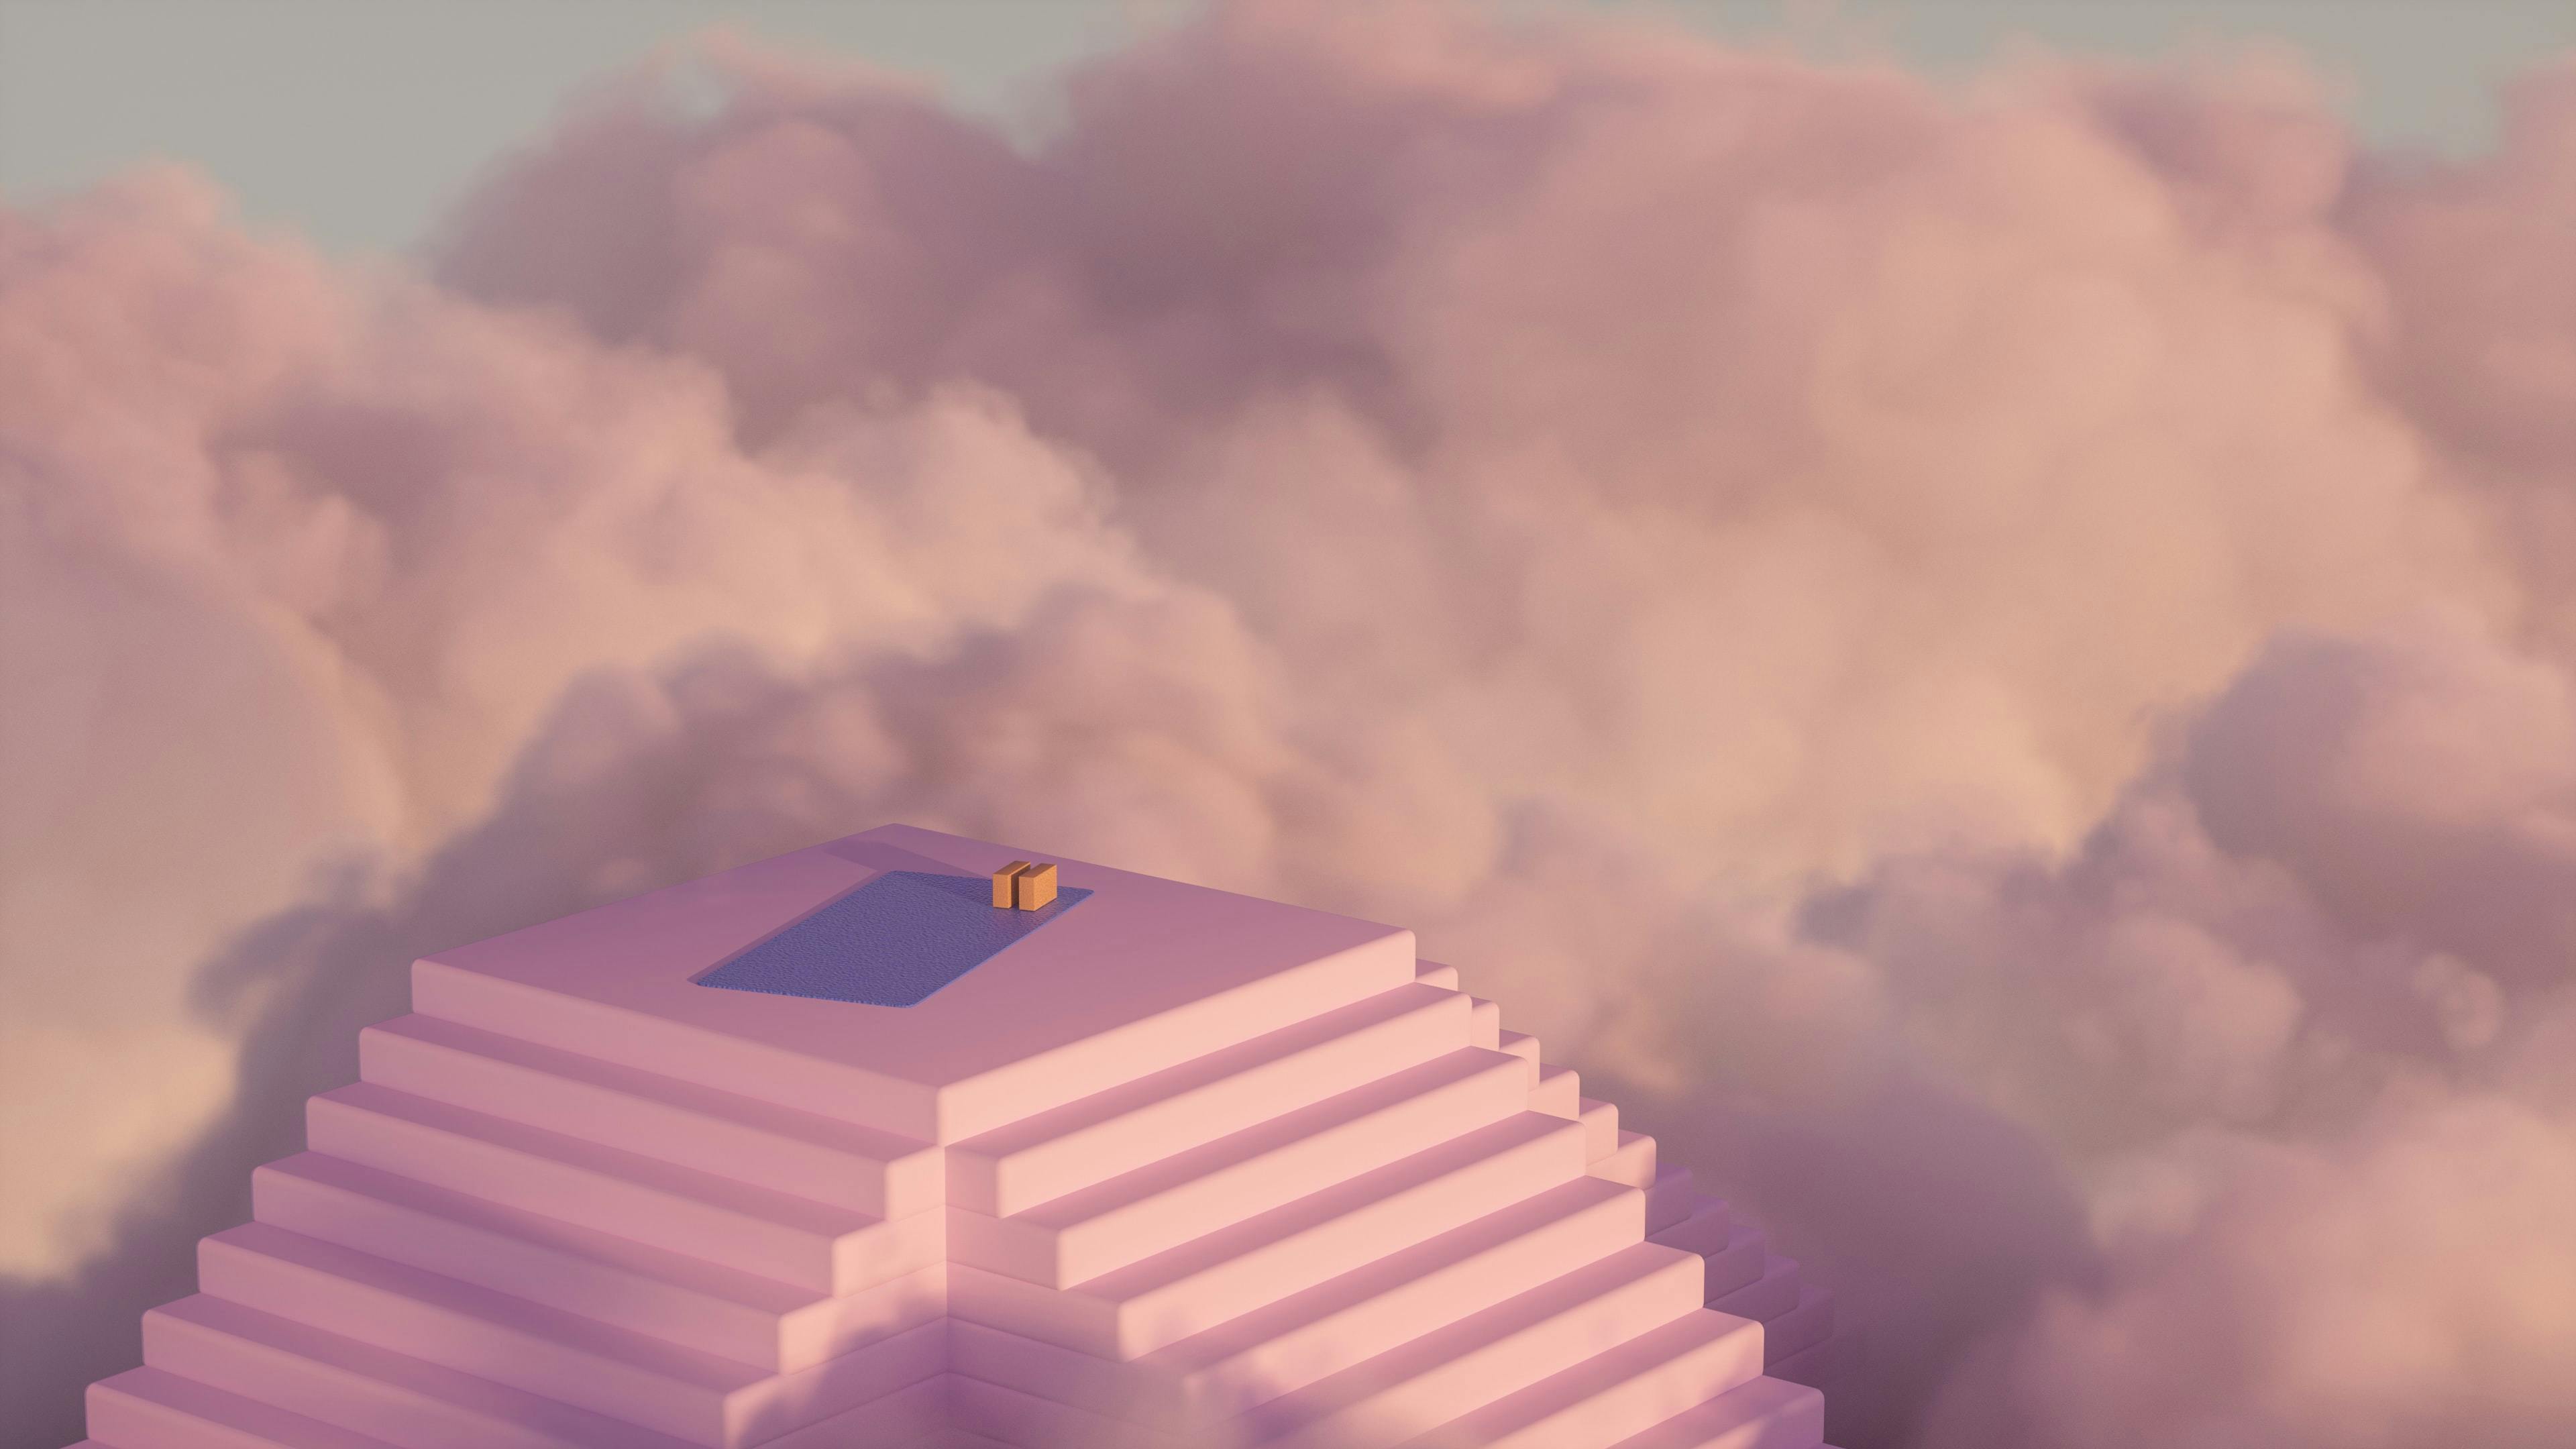 A platform in the sky with clouds around it in a metaverse world. This is to represent the ongoing problems with the metaverse around concurrent metaverse users